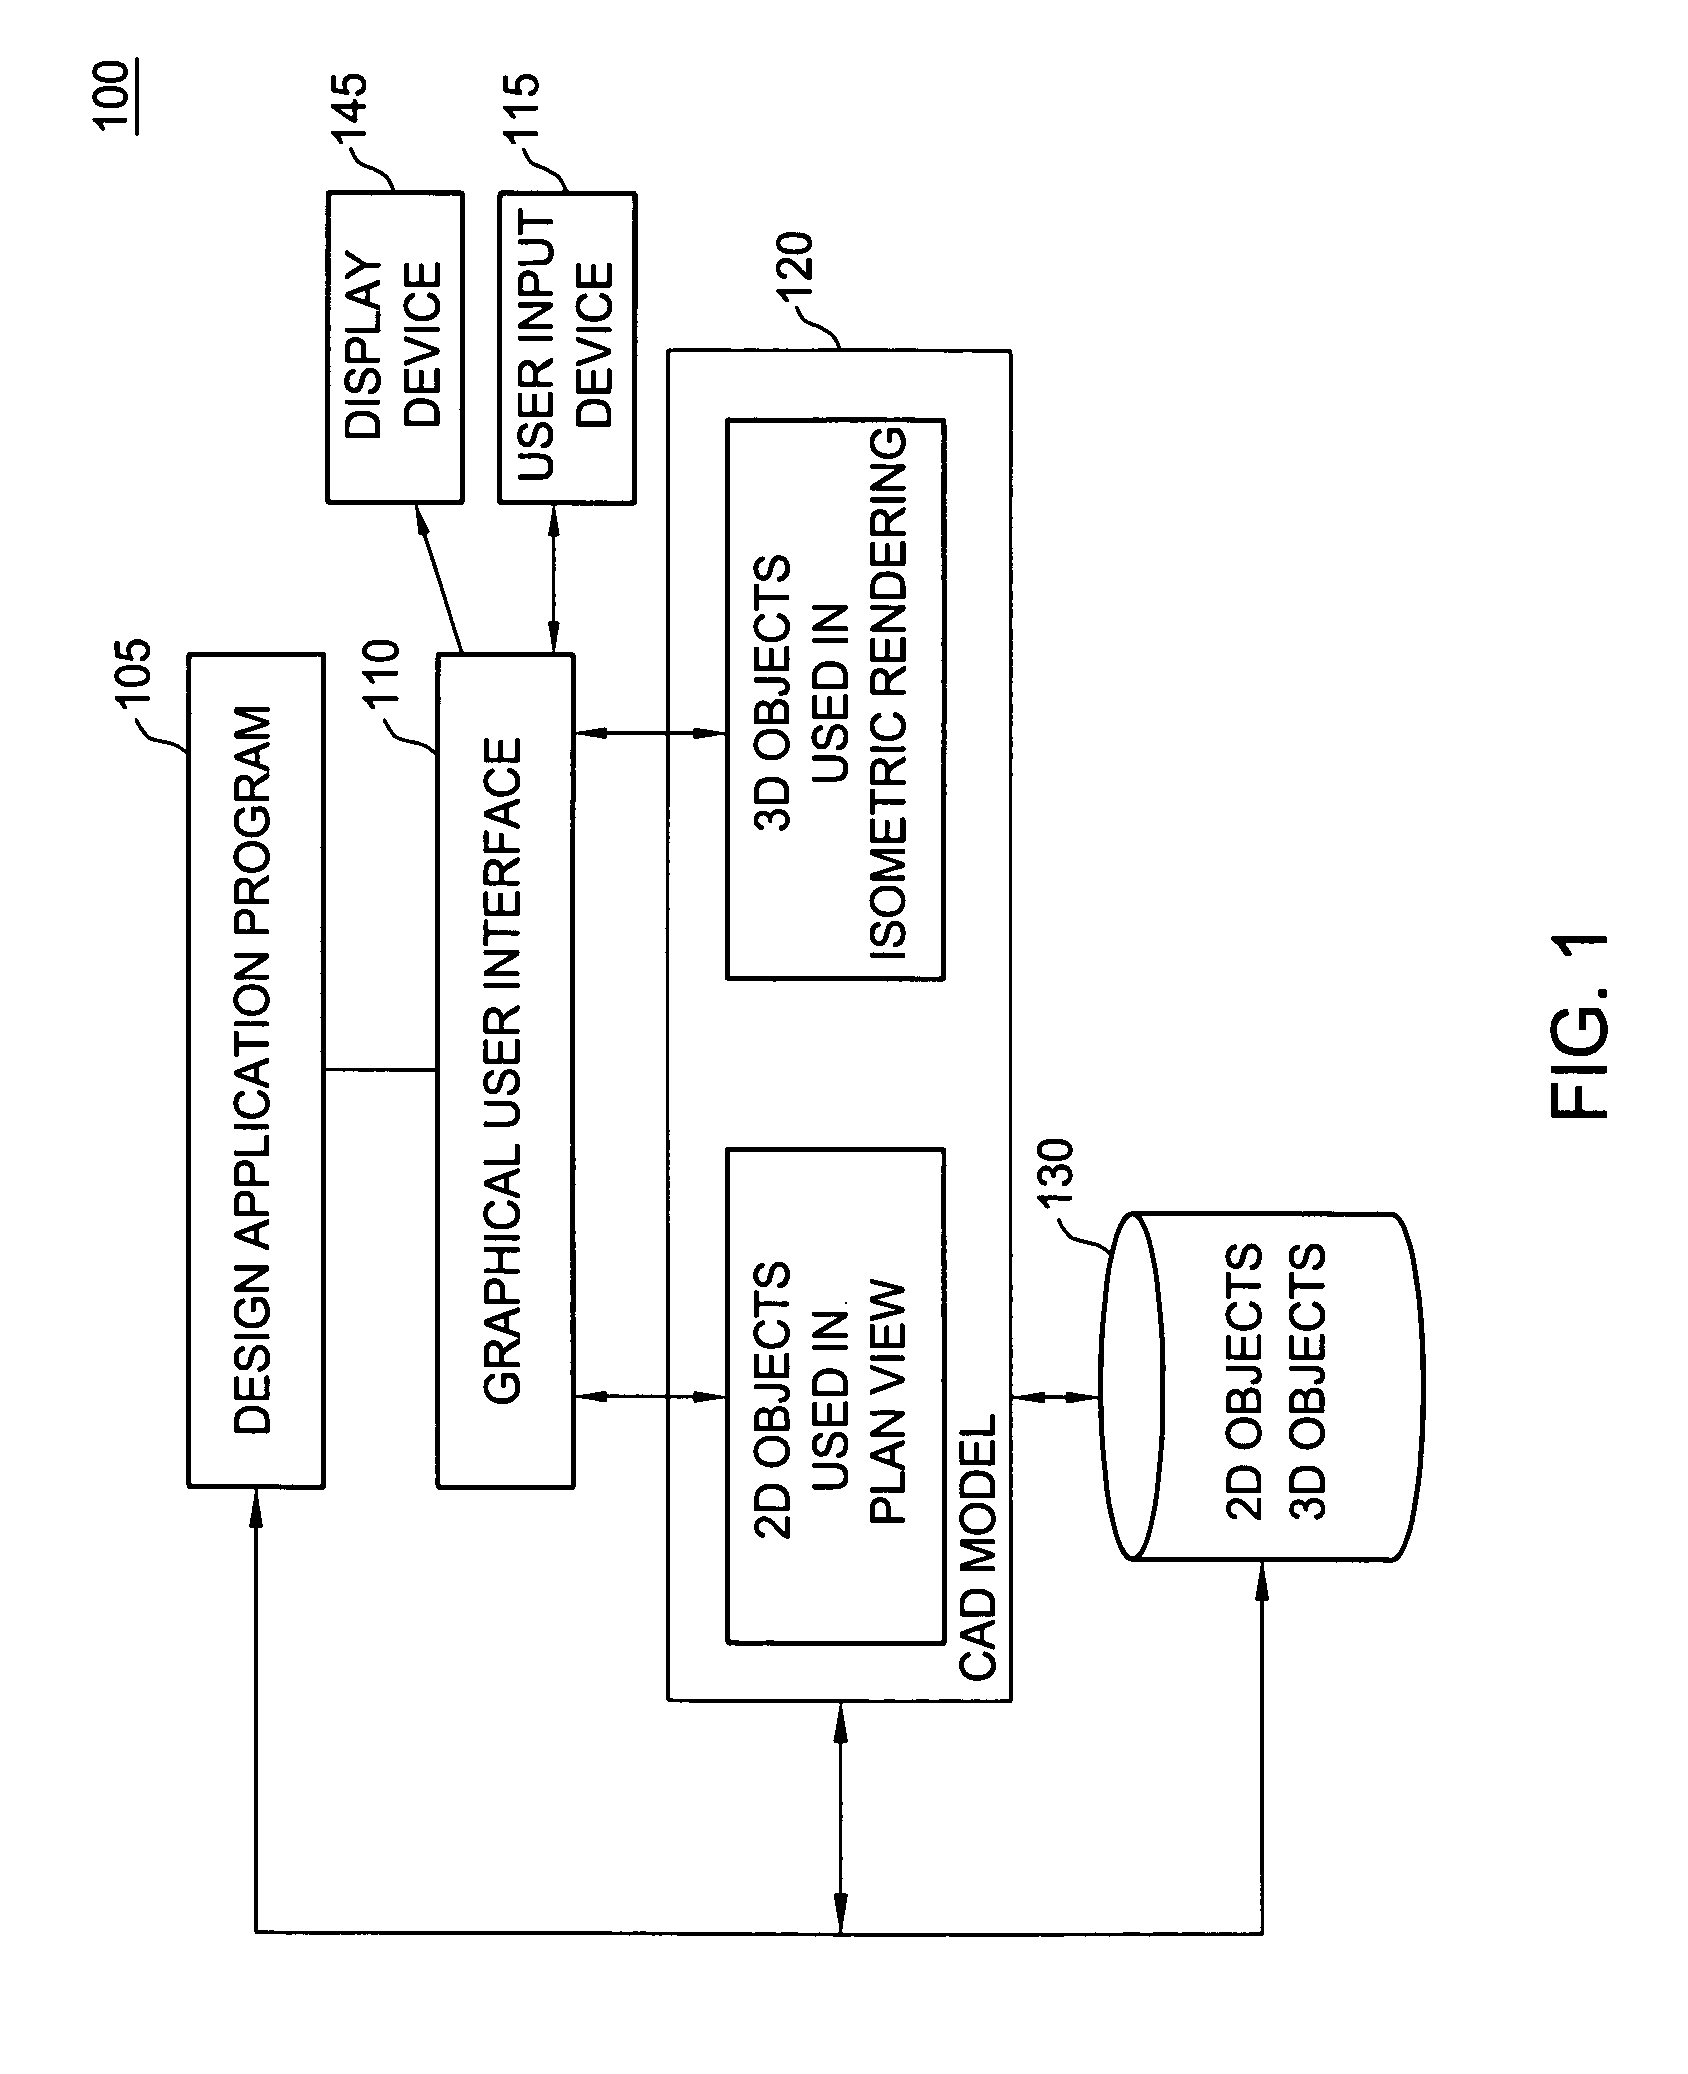 Method for creation of architectural space objects for area and volume calculation